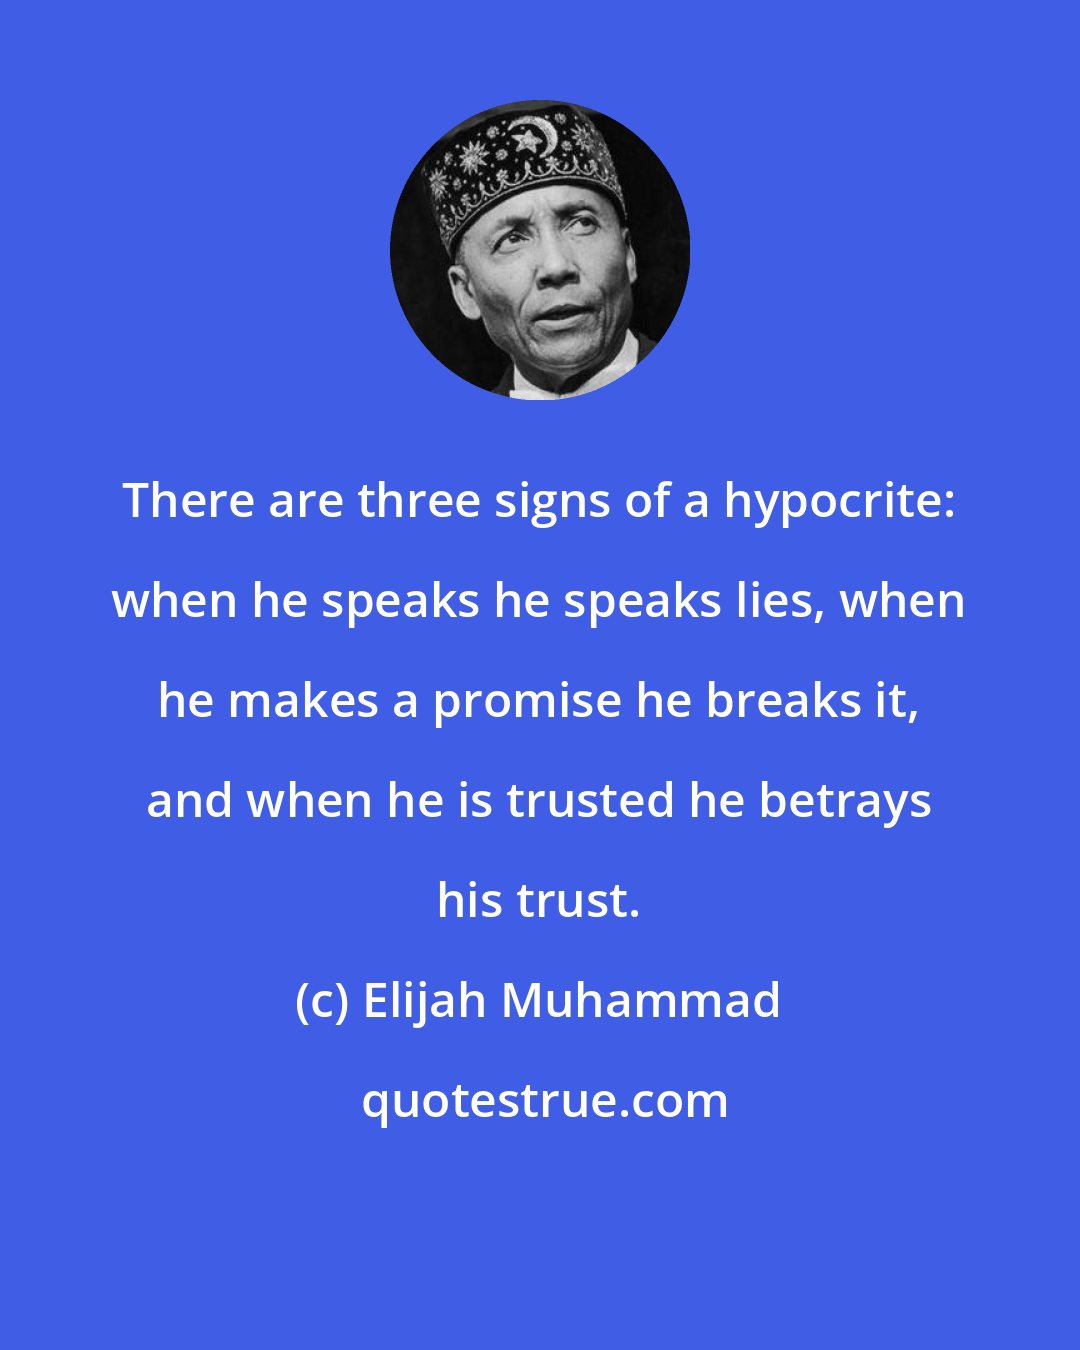 Elijah Muhammad: There are three signs of a hypocrite: when he speaks he speaks lies, when he makes a promise he breaks it, and when he is trusted he betrays his trust.